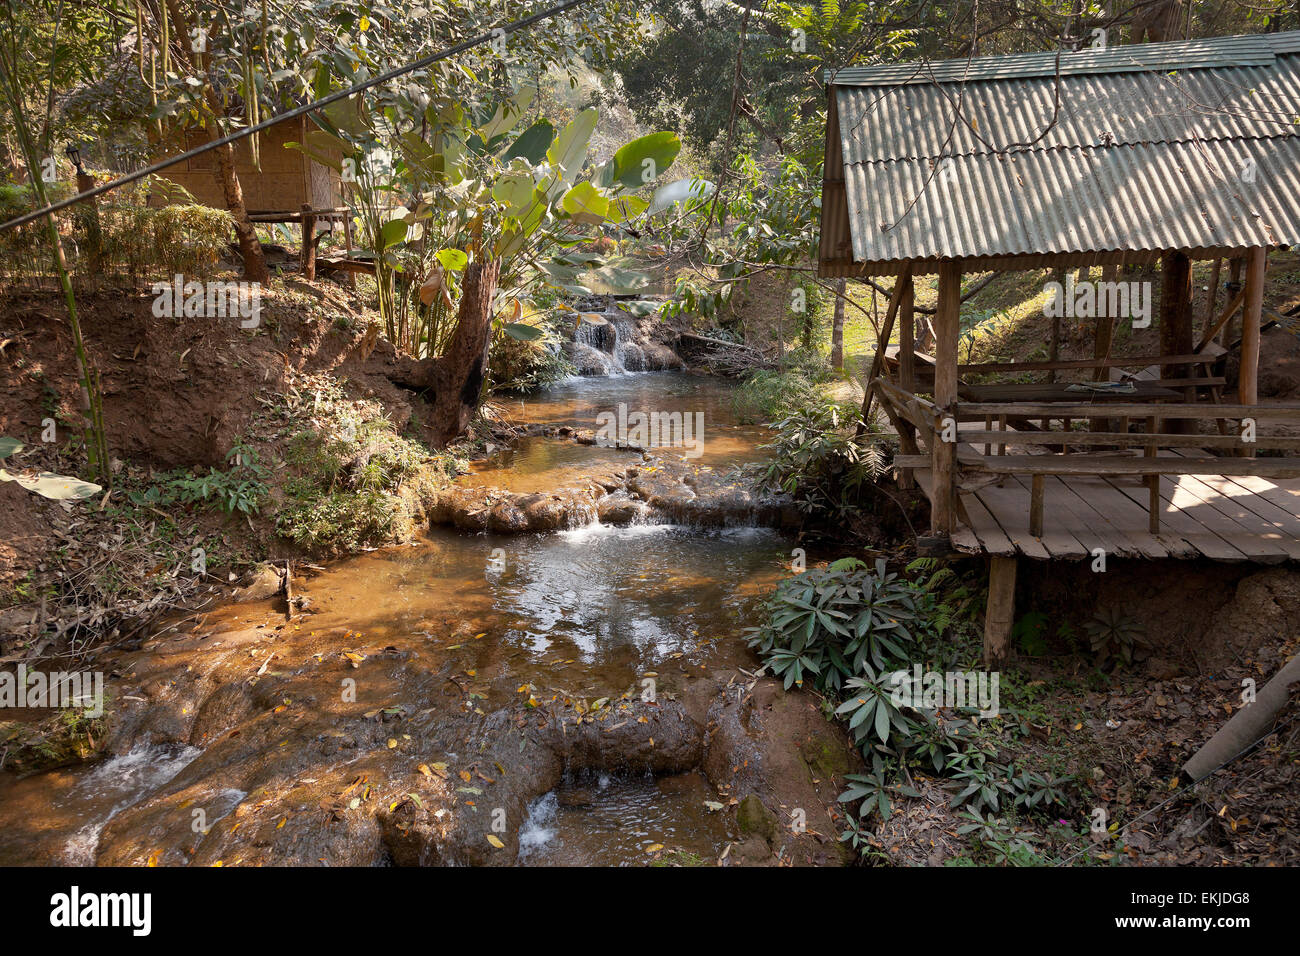 Hilltribe settlement, Northern Thailand, simple wooden shacks by a mountain stream. Stock Photo